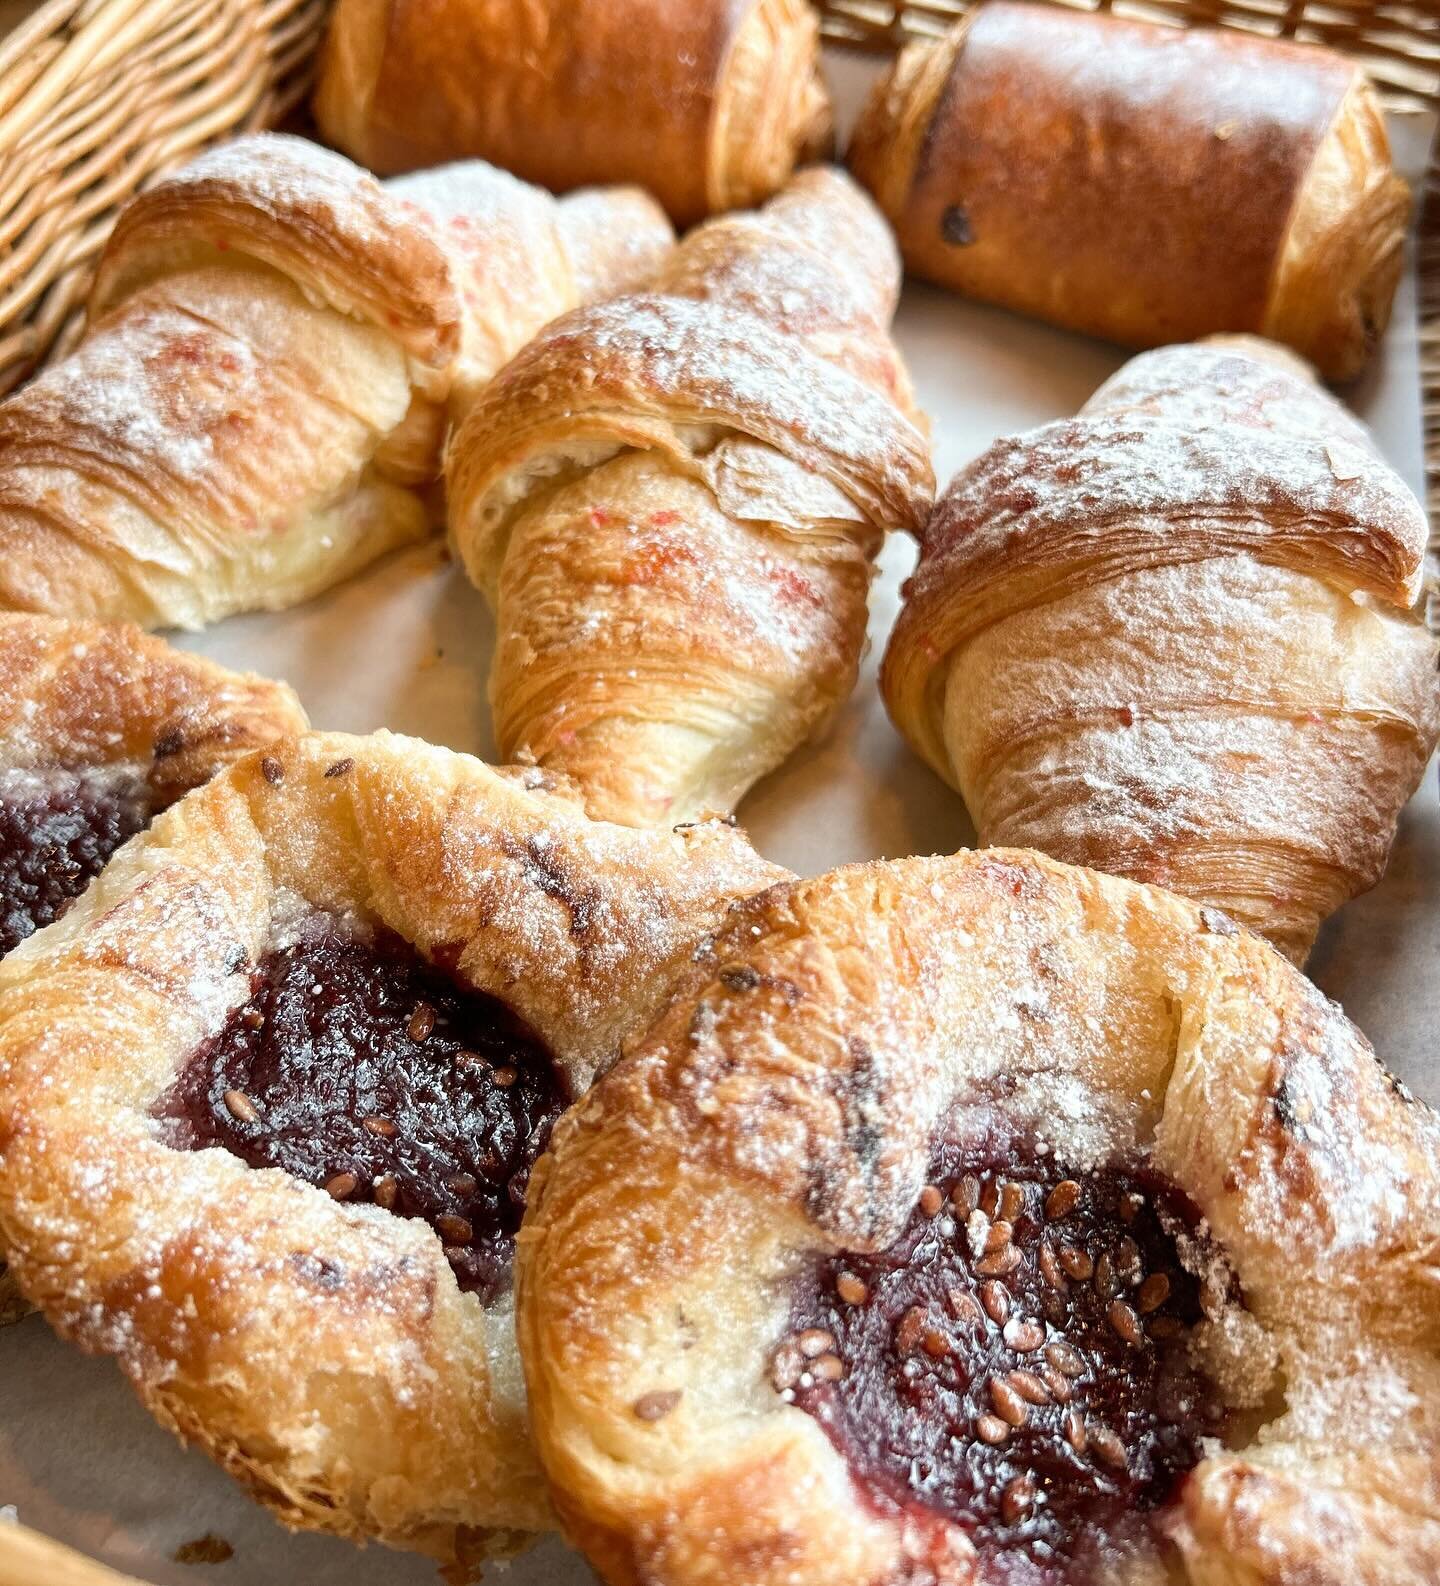 Pastries, get your pastries! 

New deal this week, pastries just &pound;1 after 2pm with the purchase of one of our handmade drinks! 

Get &lsquo;em before they&rsquo;re gone! 

#pastries #coffee #littletreat #treatyourself #shopsmall #supportsmallbu